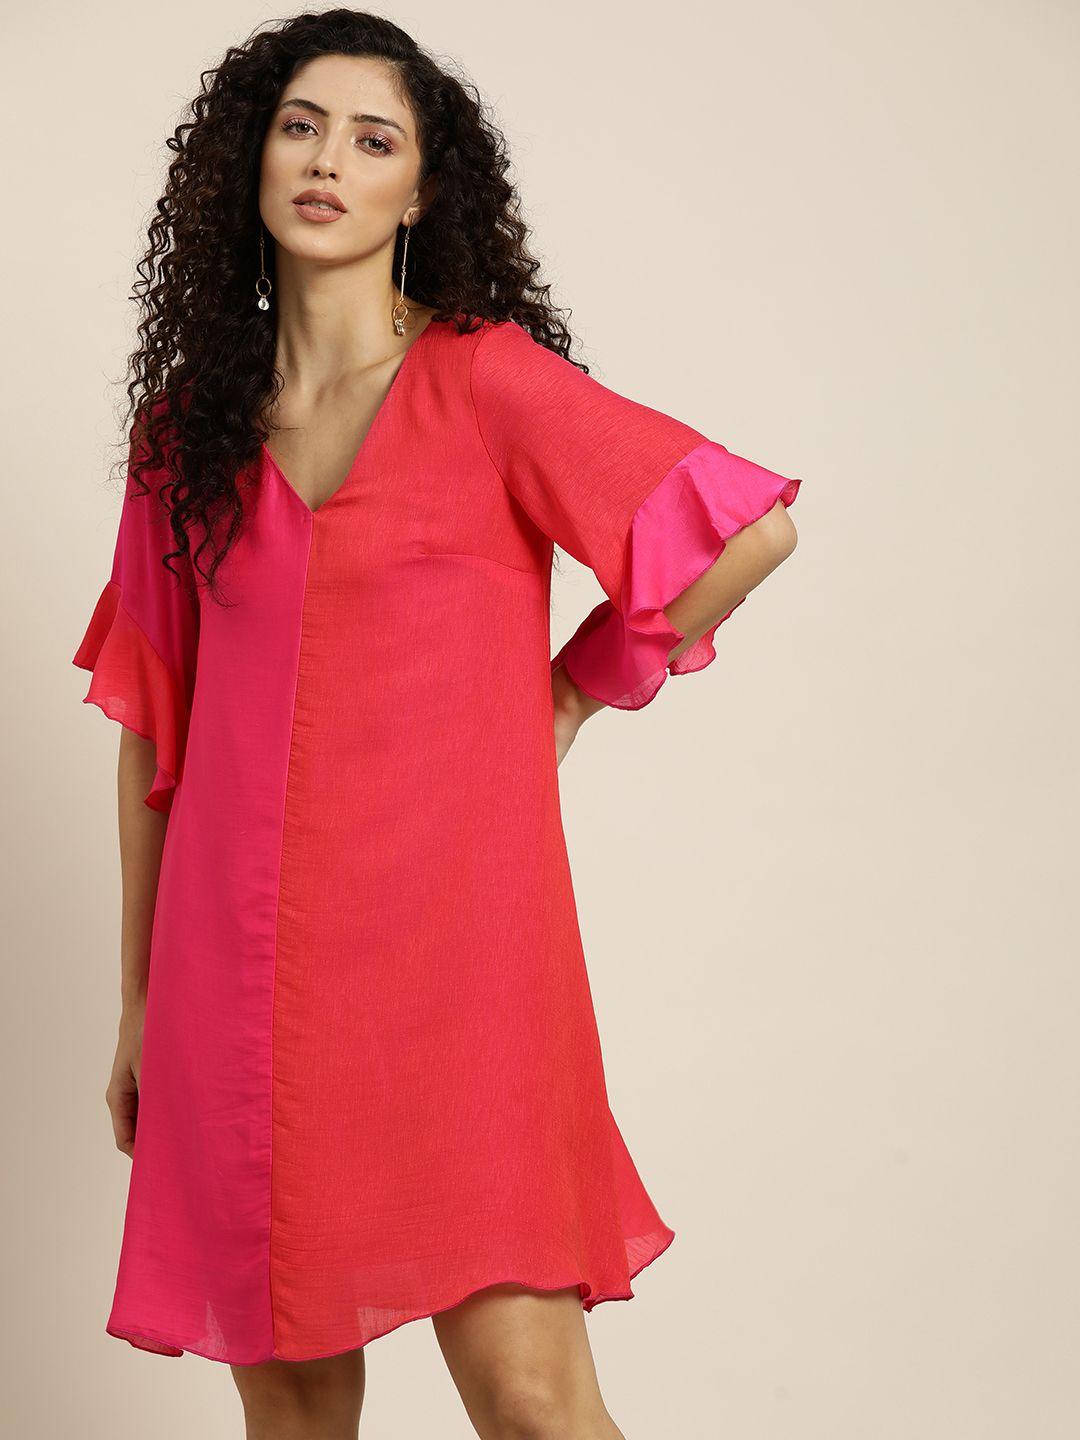 qurvii fuchsia & red colourblocked bell sleeves a-line dress